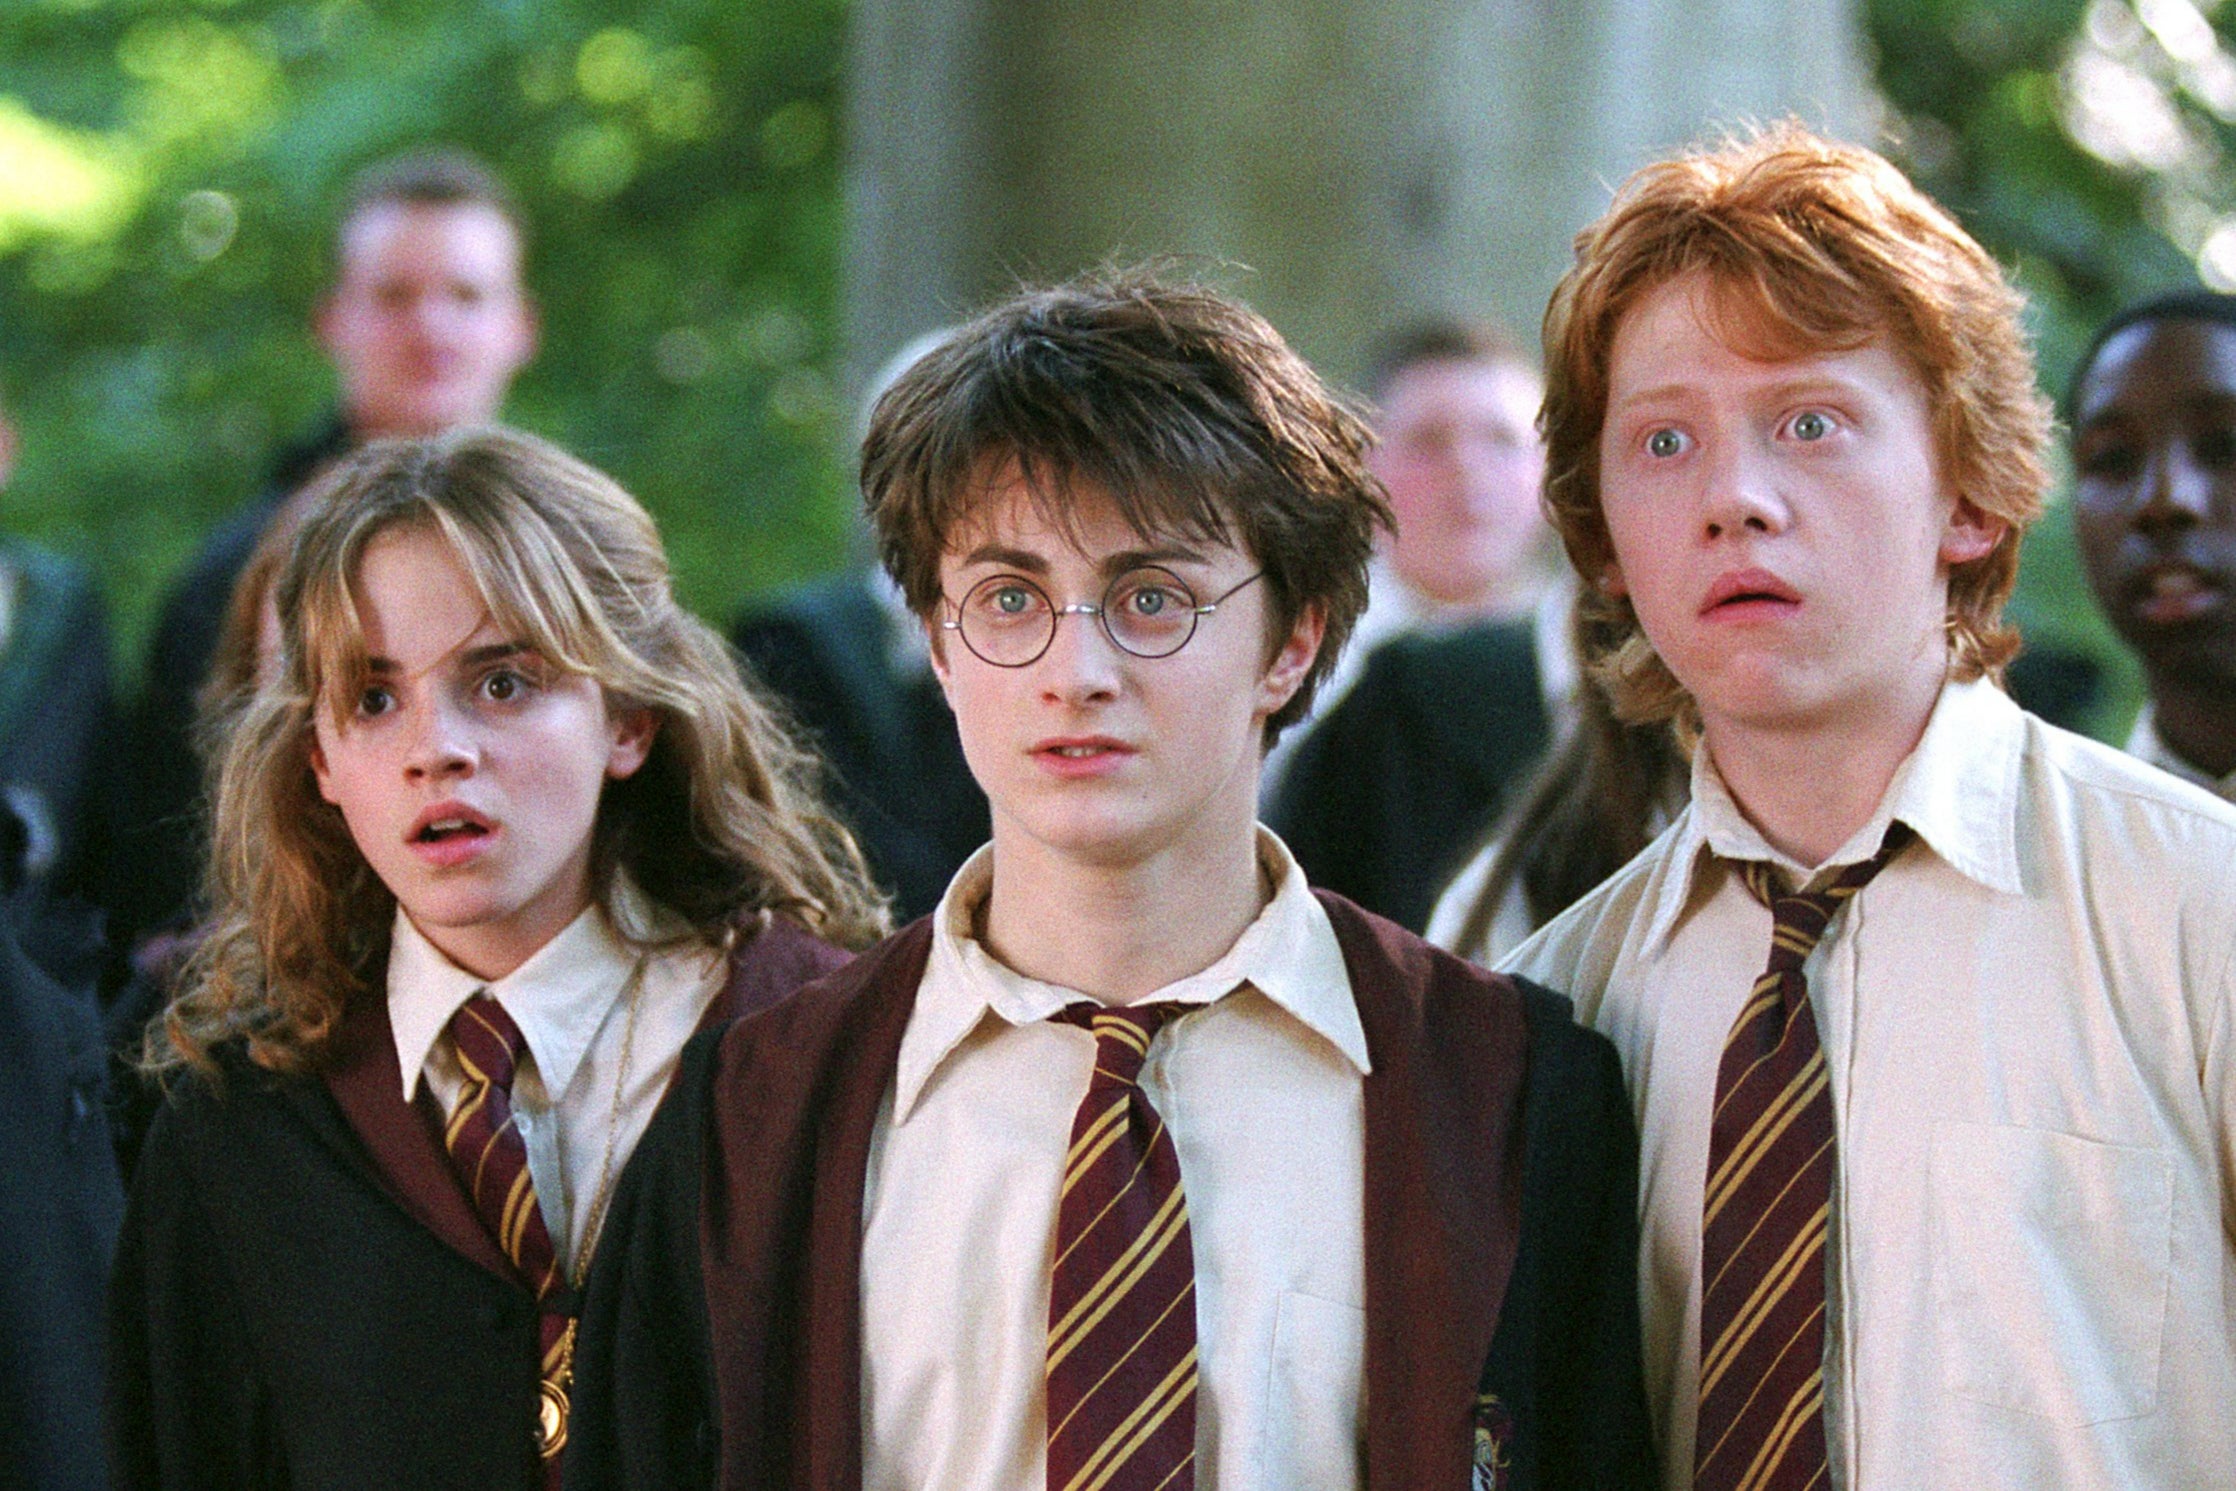 Emma Watson, Daniel Radcliffe and Rupert Grint in Harry Potter And The Prisoner Of Azkaban